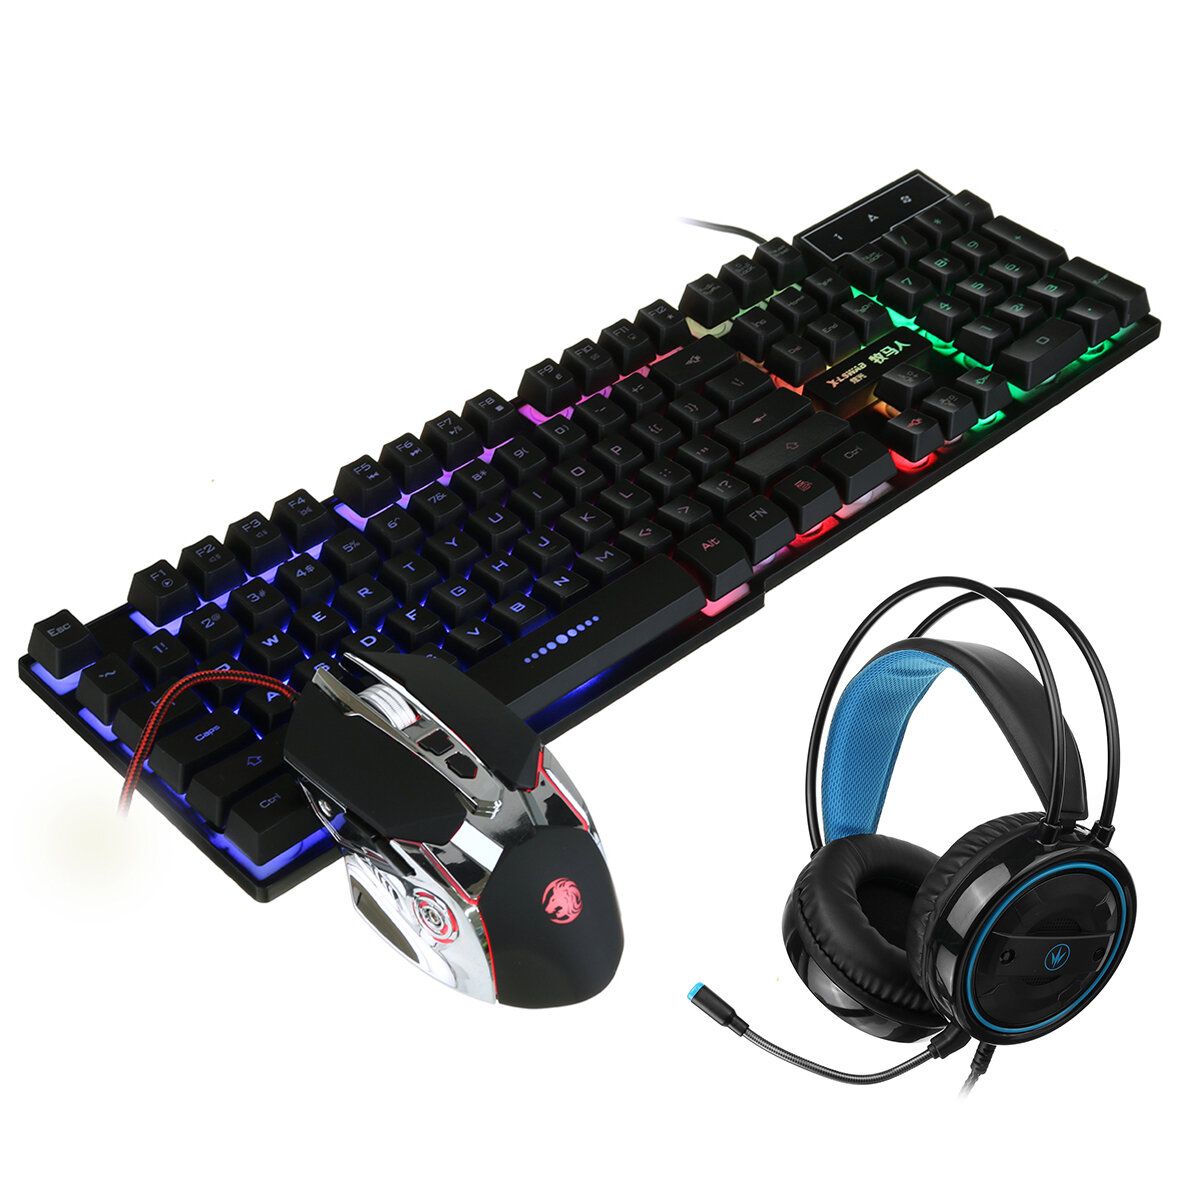 Bakeey Mice Keyboards Headphones Combo 104-Key Backlit Mechanical Waterproof Wired Keyboard G5 800DPI Wired Mice 7.1 Stereo Sound 3.5MM USB...